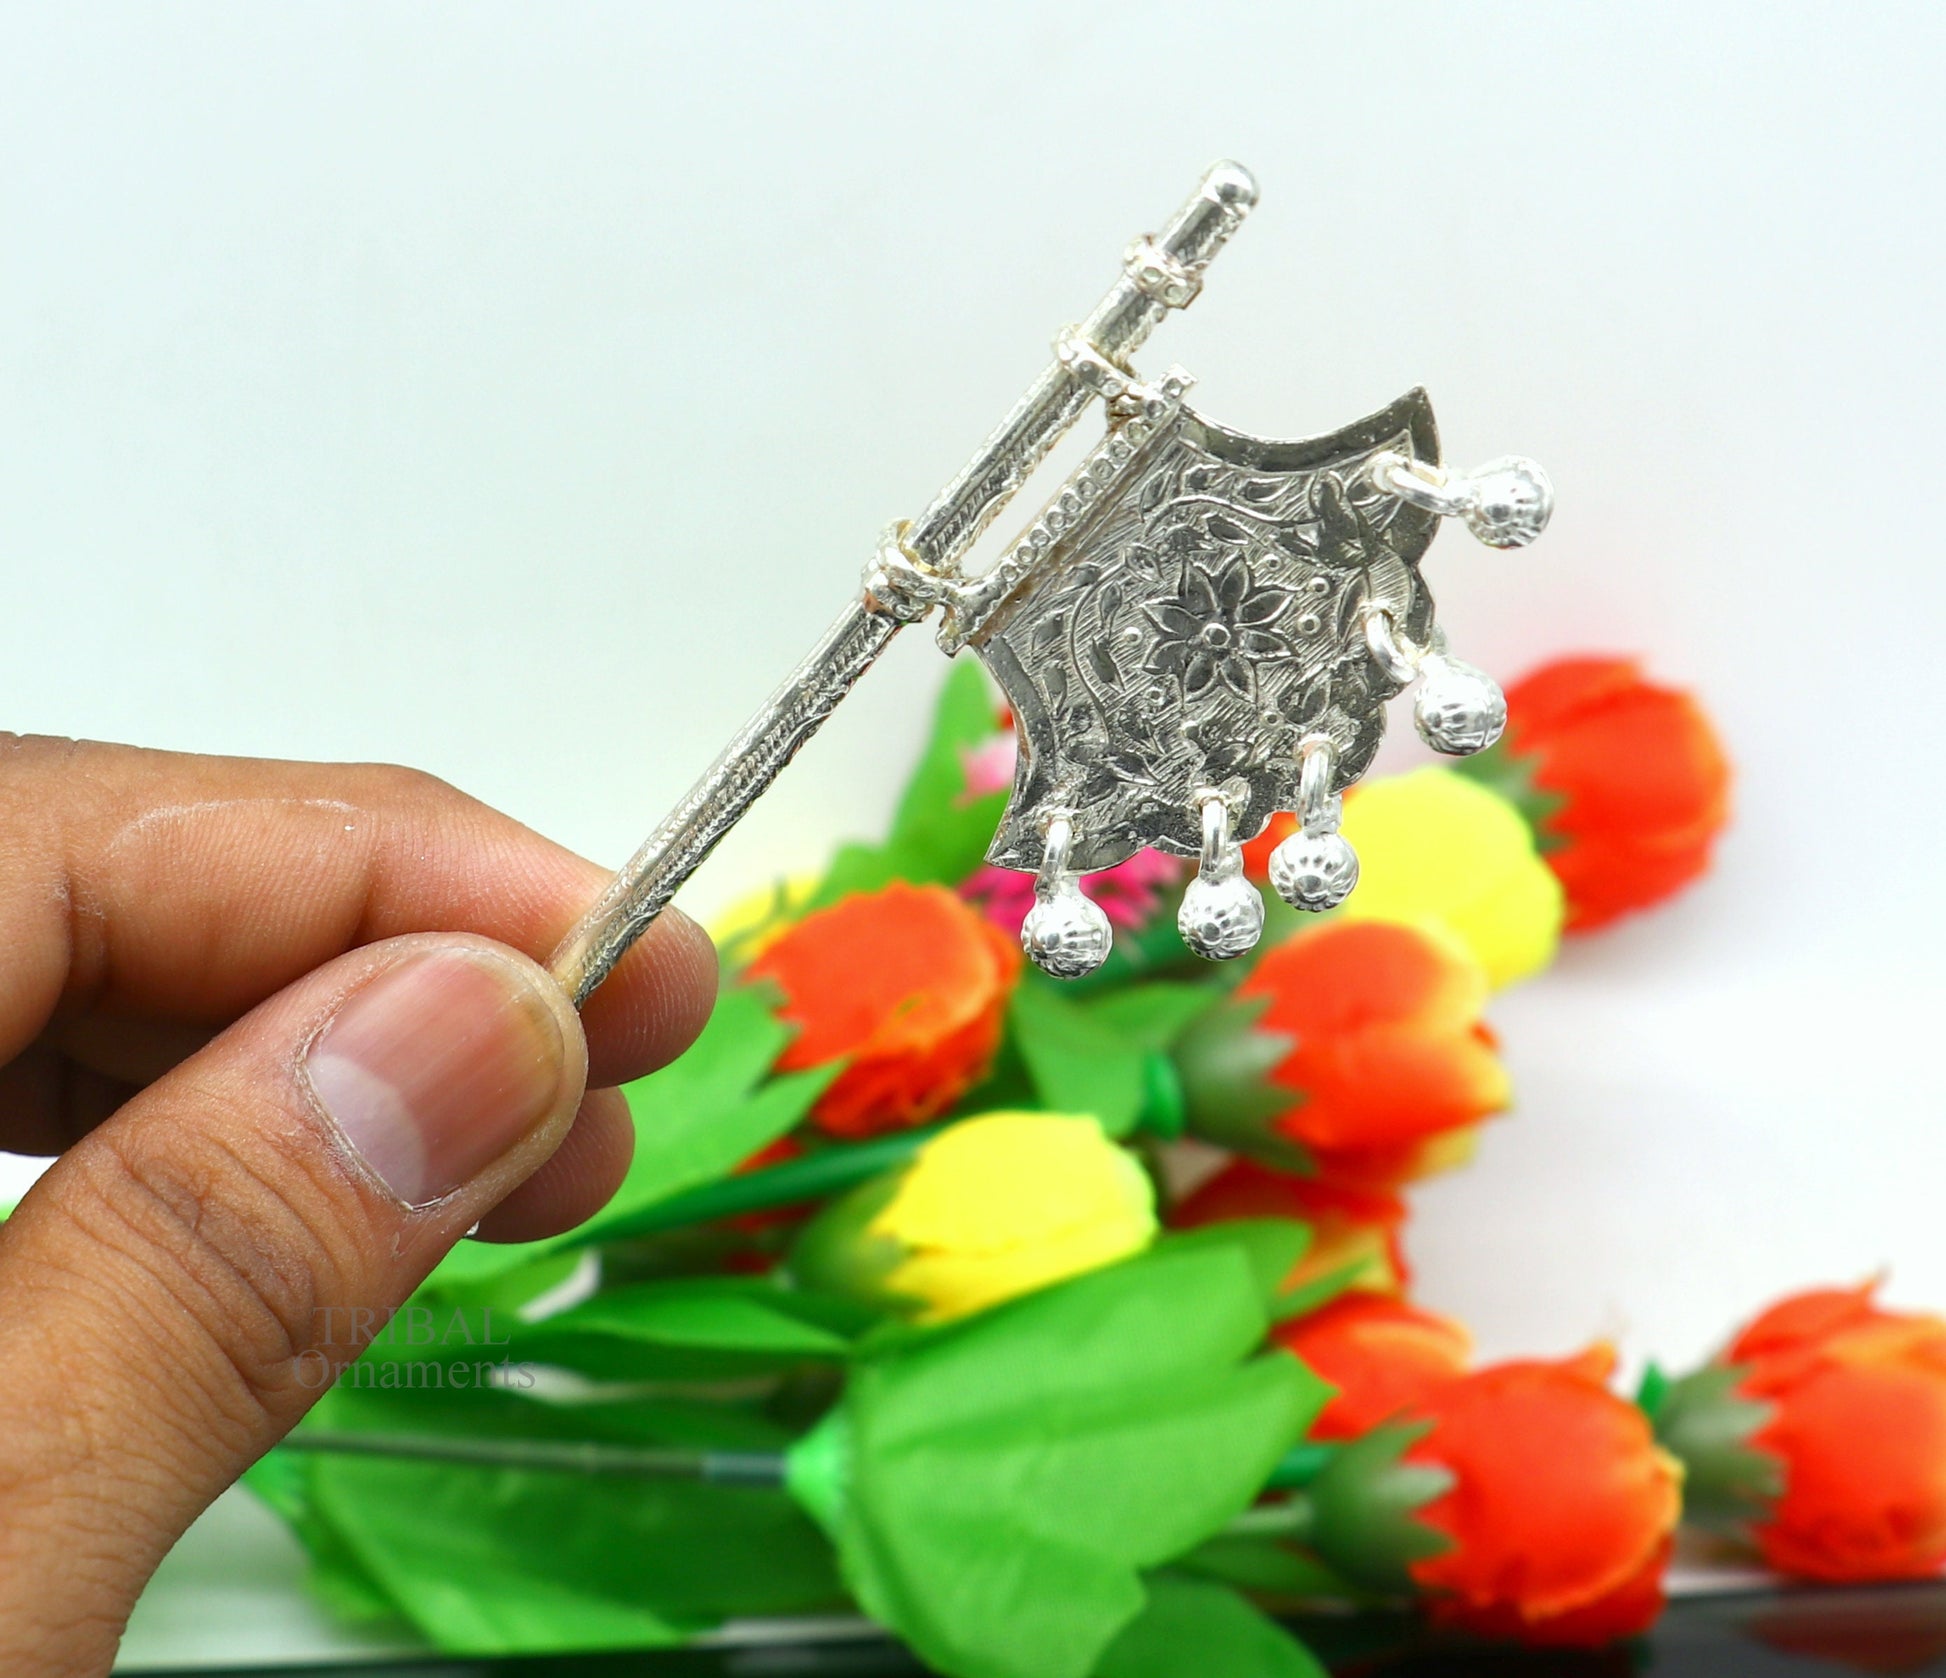 925 sterling silver pankhi, small fan or pankhi for god puja, best gifting to laddu gopala krishna, silver hand fan puja article su688 - TRIBAL ORNAMENTS